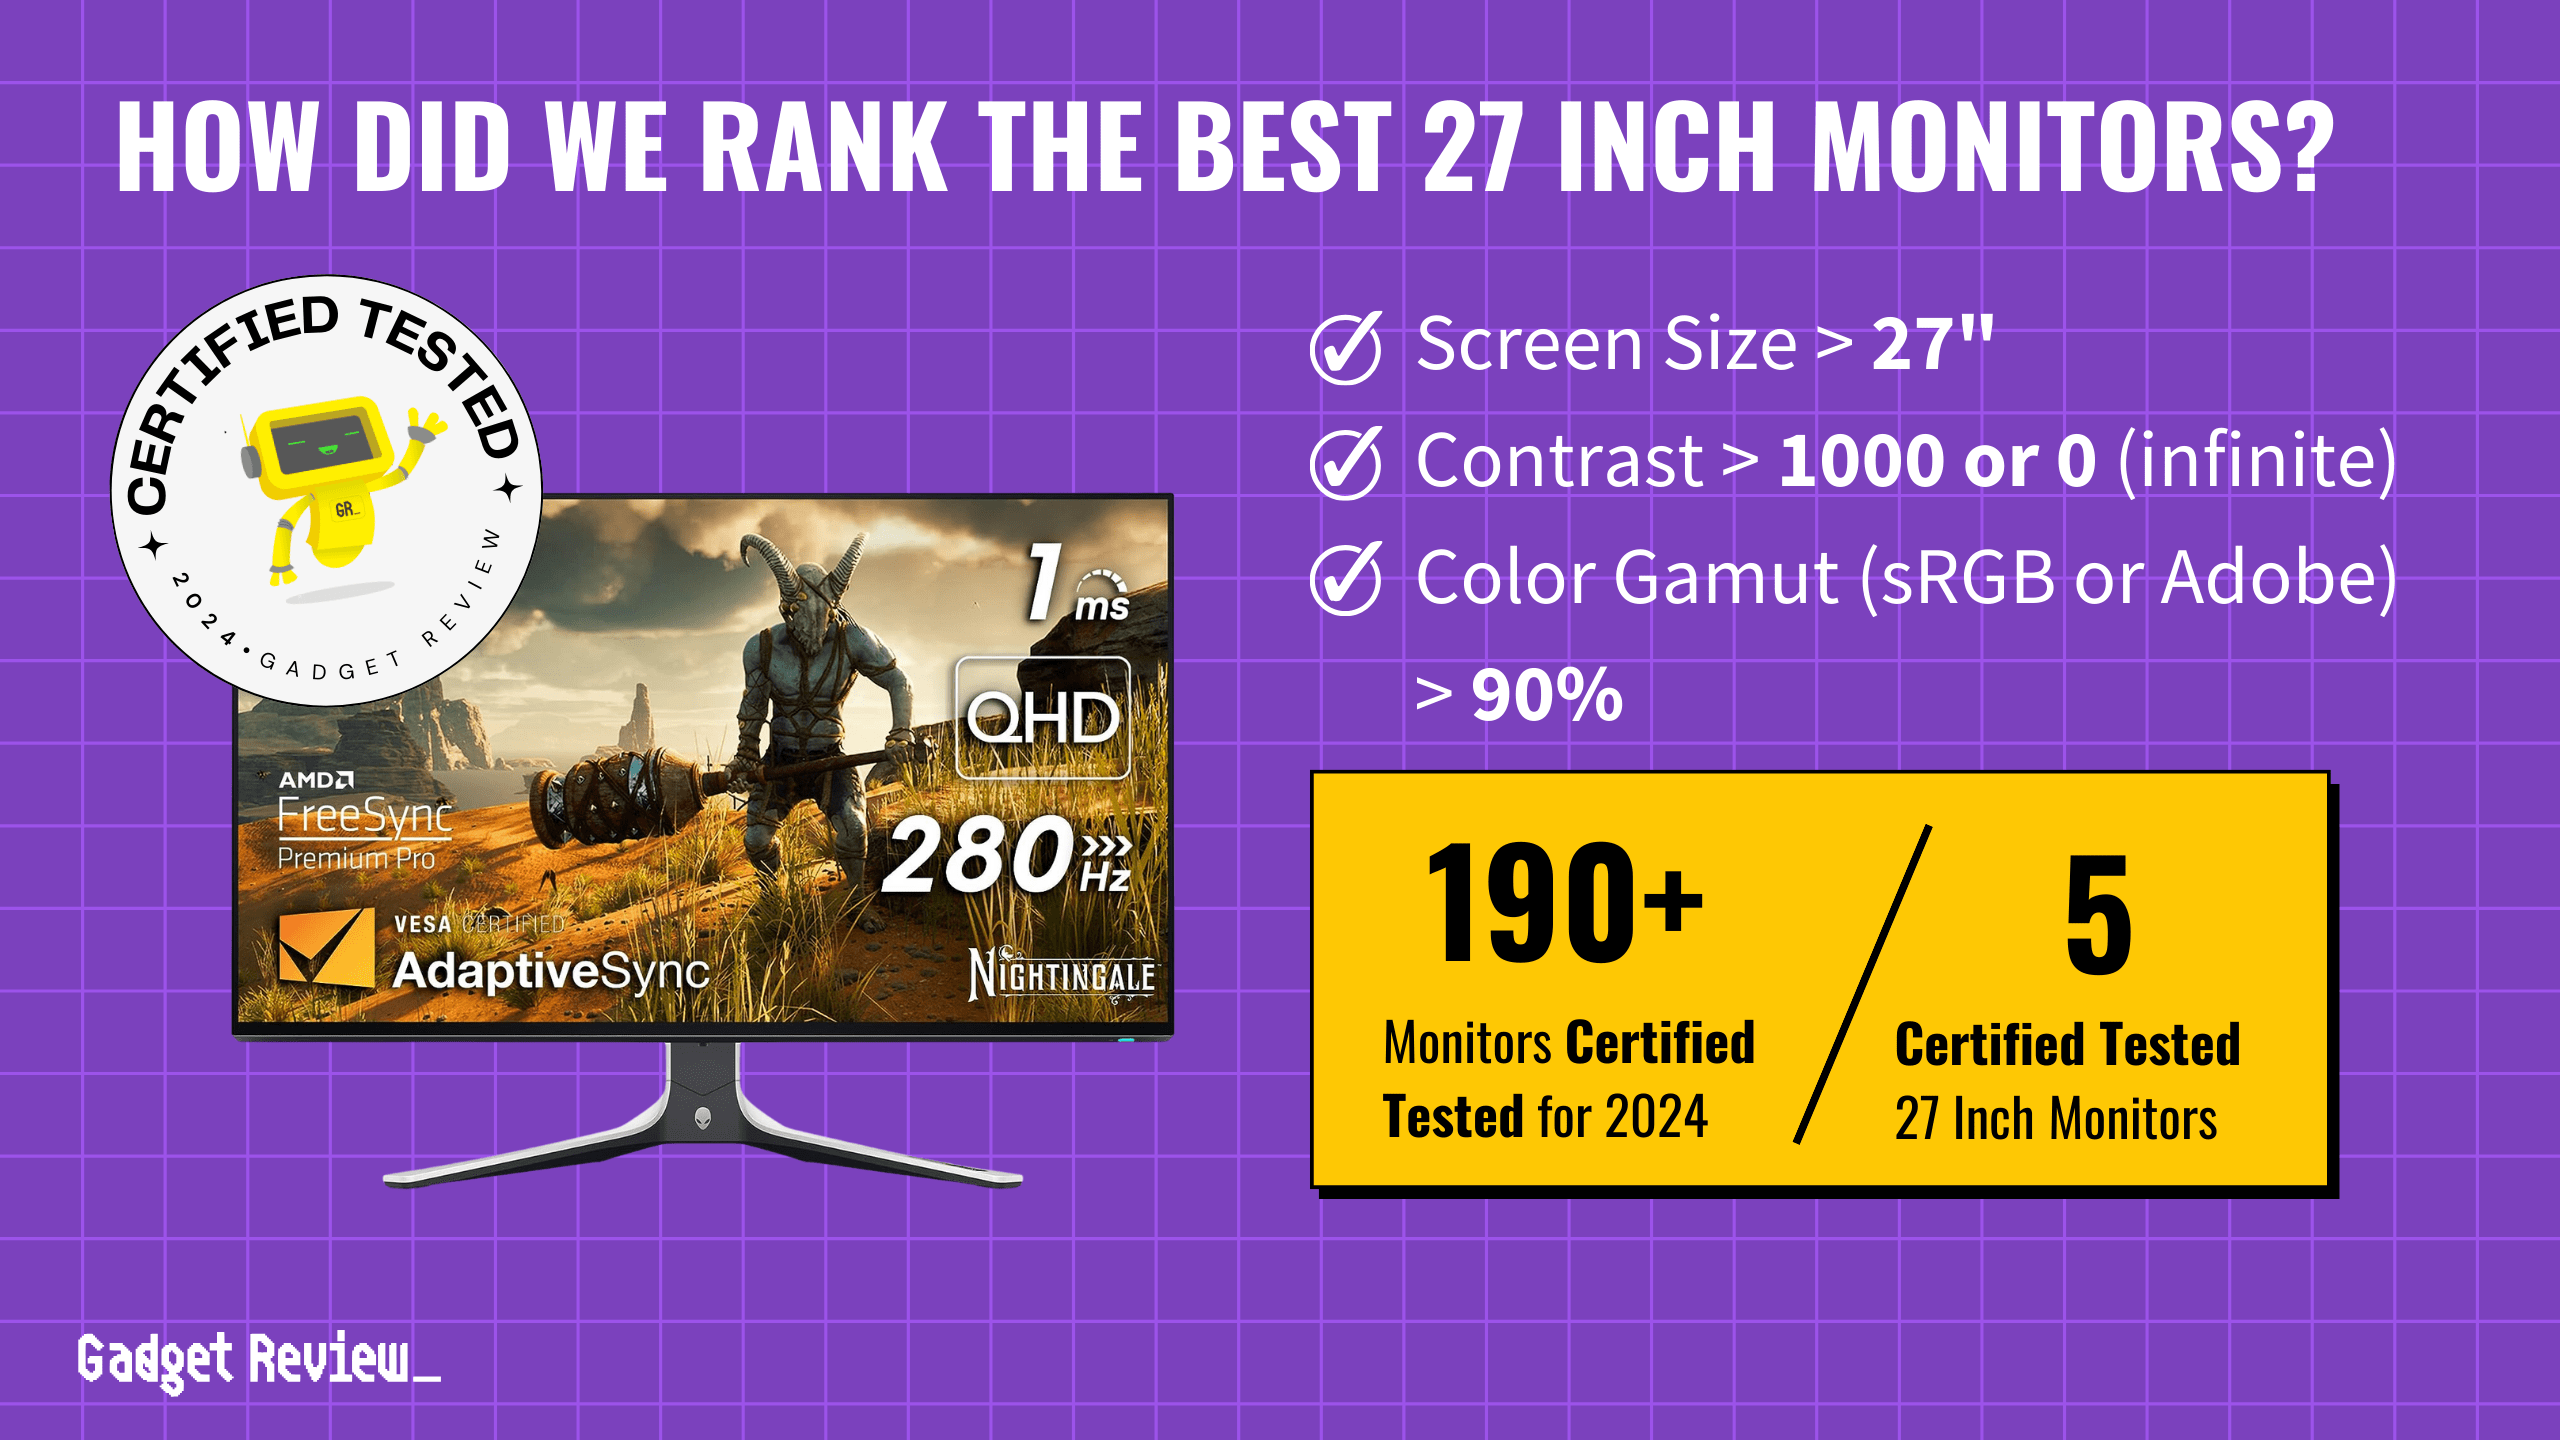 What Are The 5 Top 27 Inch Monitors?